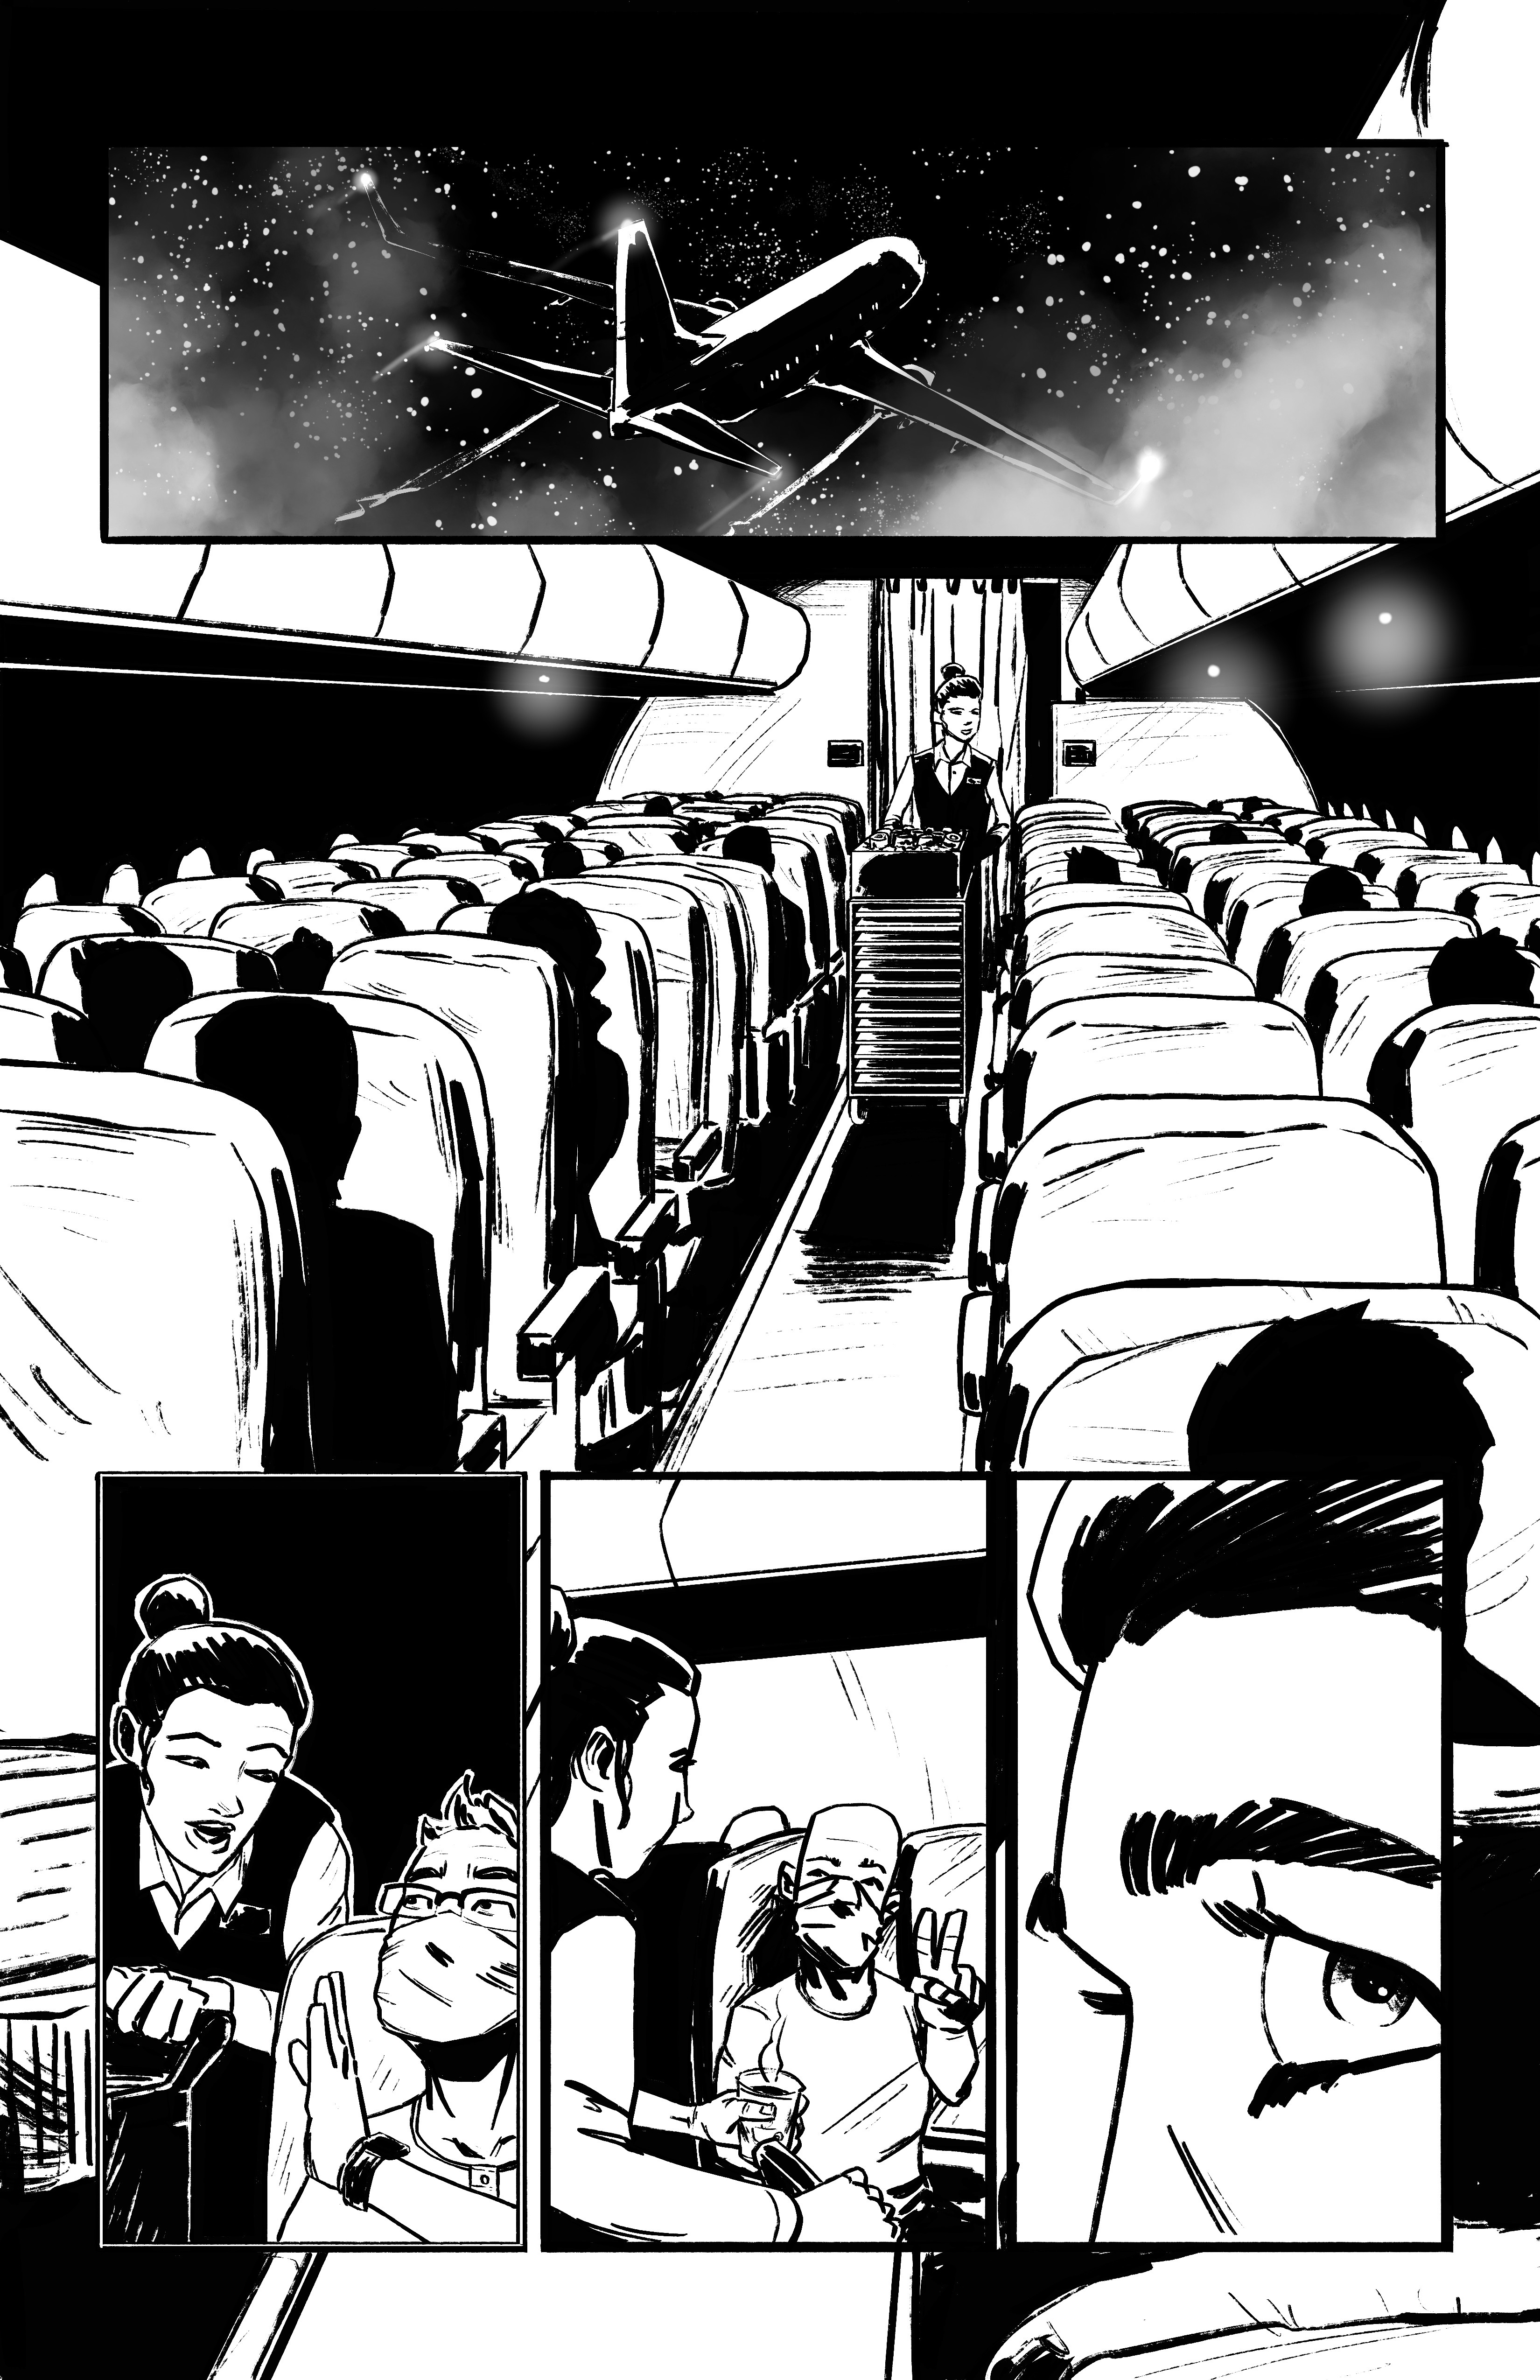 Flight 616: Page 1  - Done in Procreate for the iPad Pro